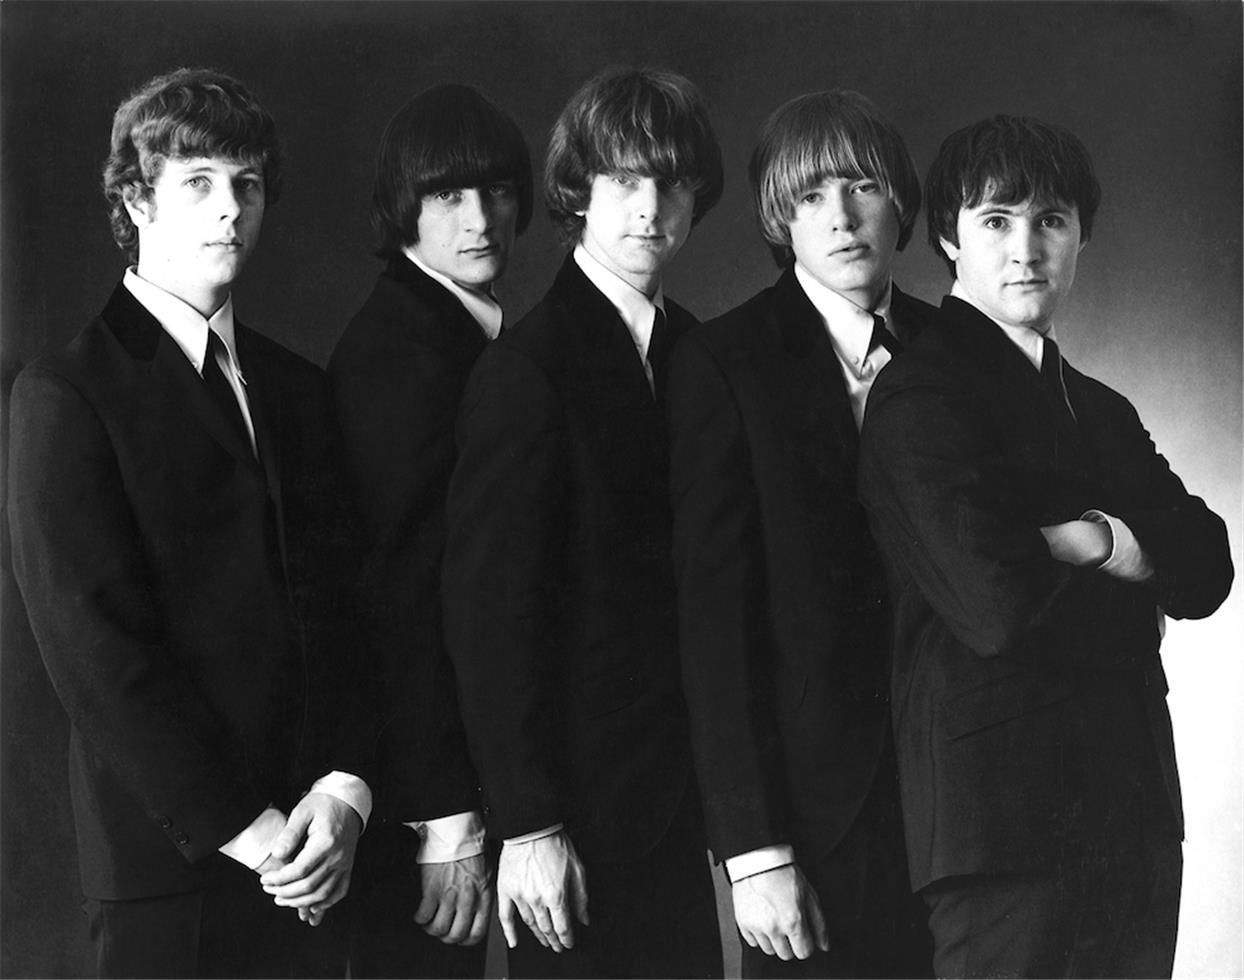 Guy Webster Black and White Photograph - The Byrds